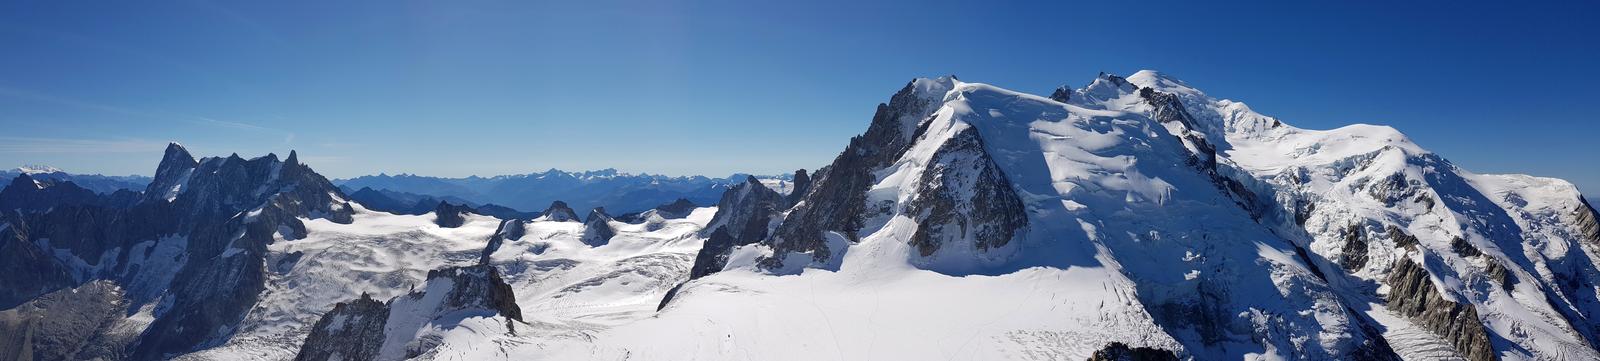 Top of Aiguille